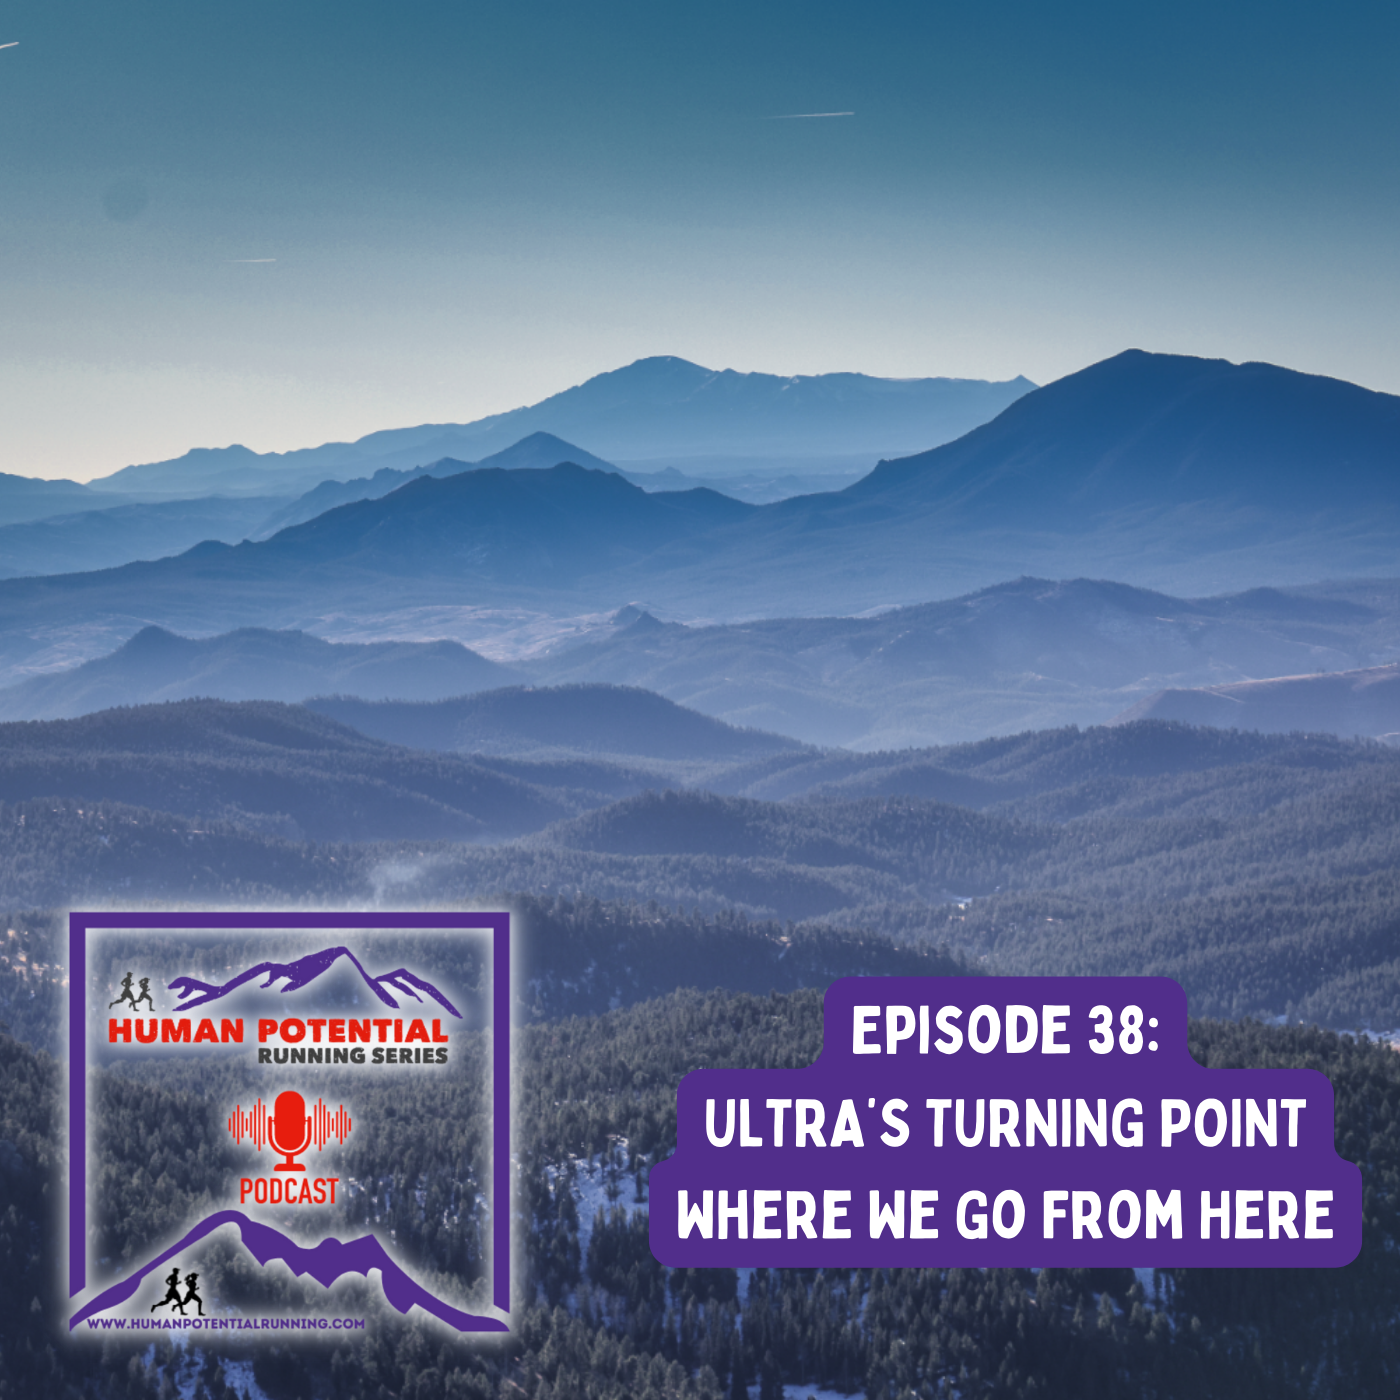 HPRS Podcast Episode 38: Ultra’s Turning Point. Where We Go From Here